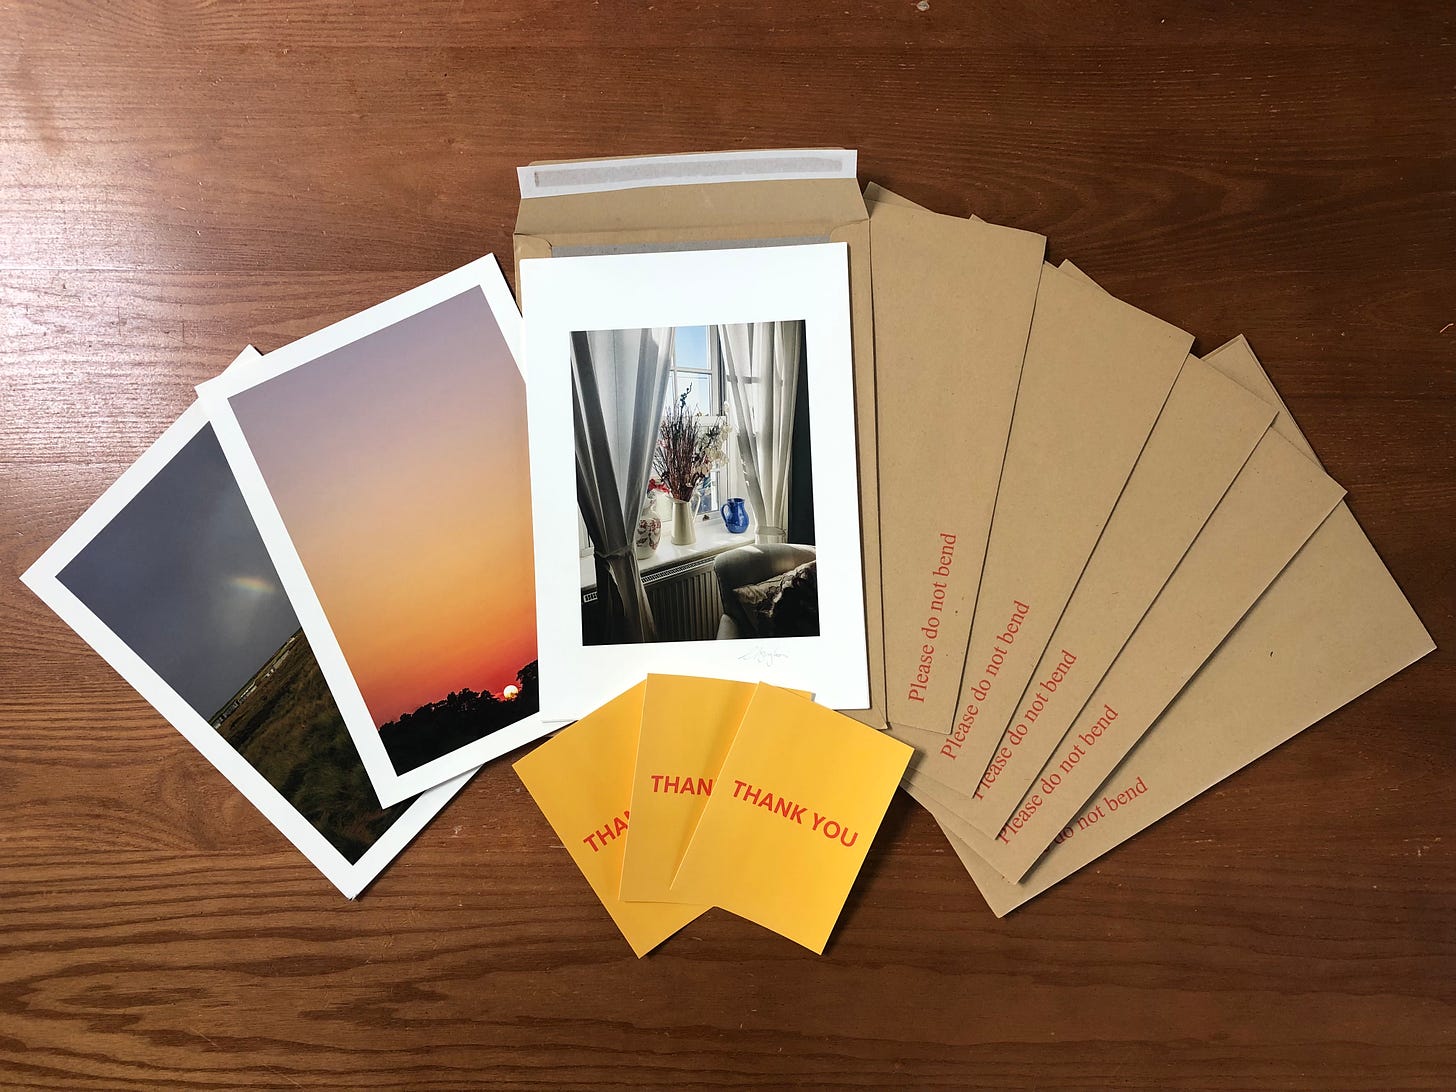 Prints, yellow thank you cards and do not bend envelopes fanned out on a wooden table